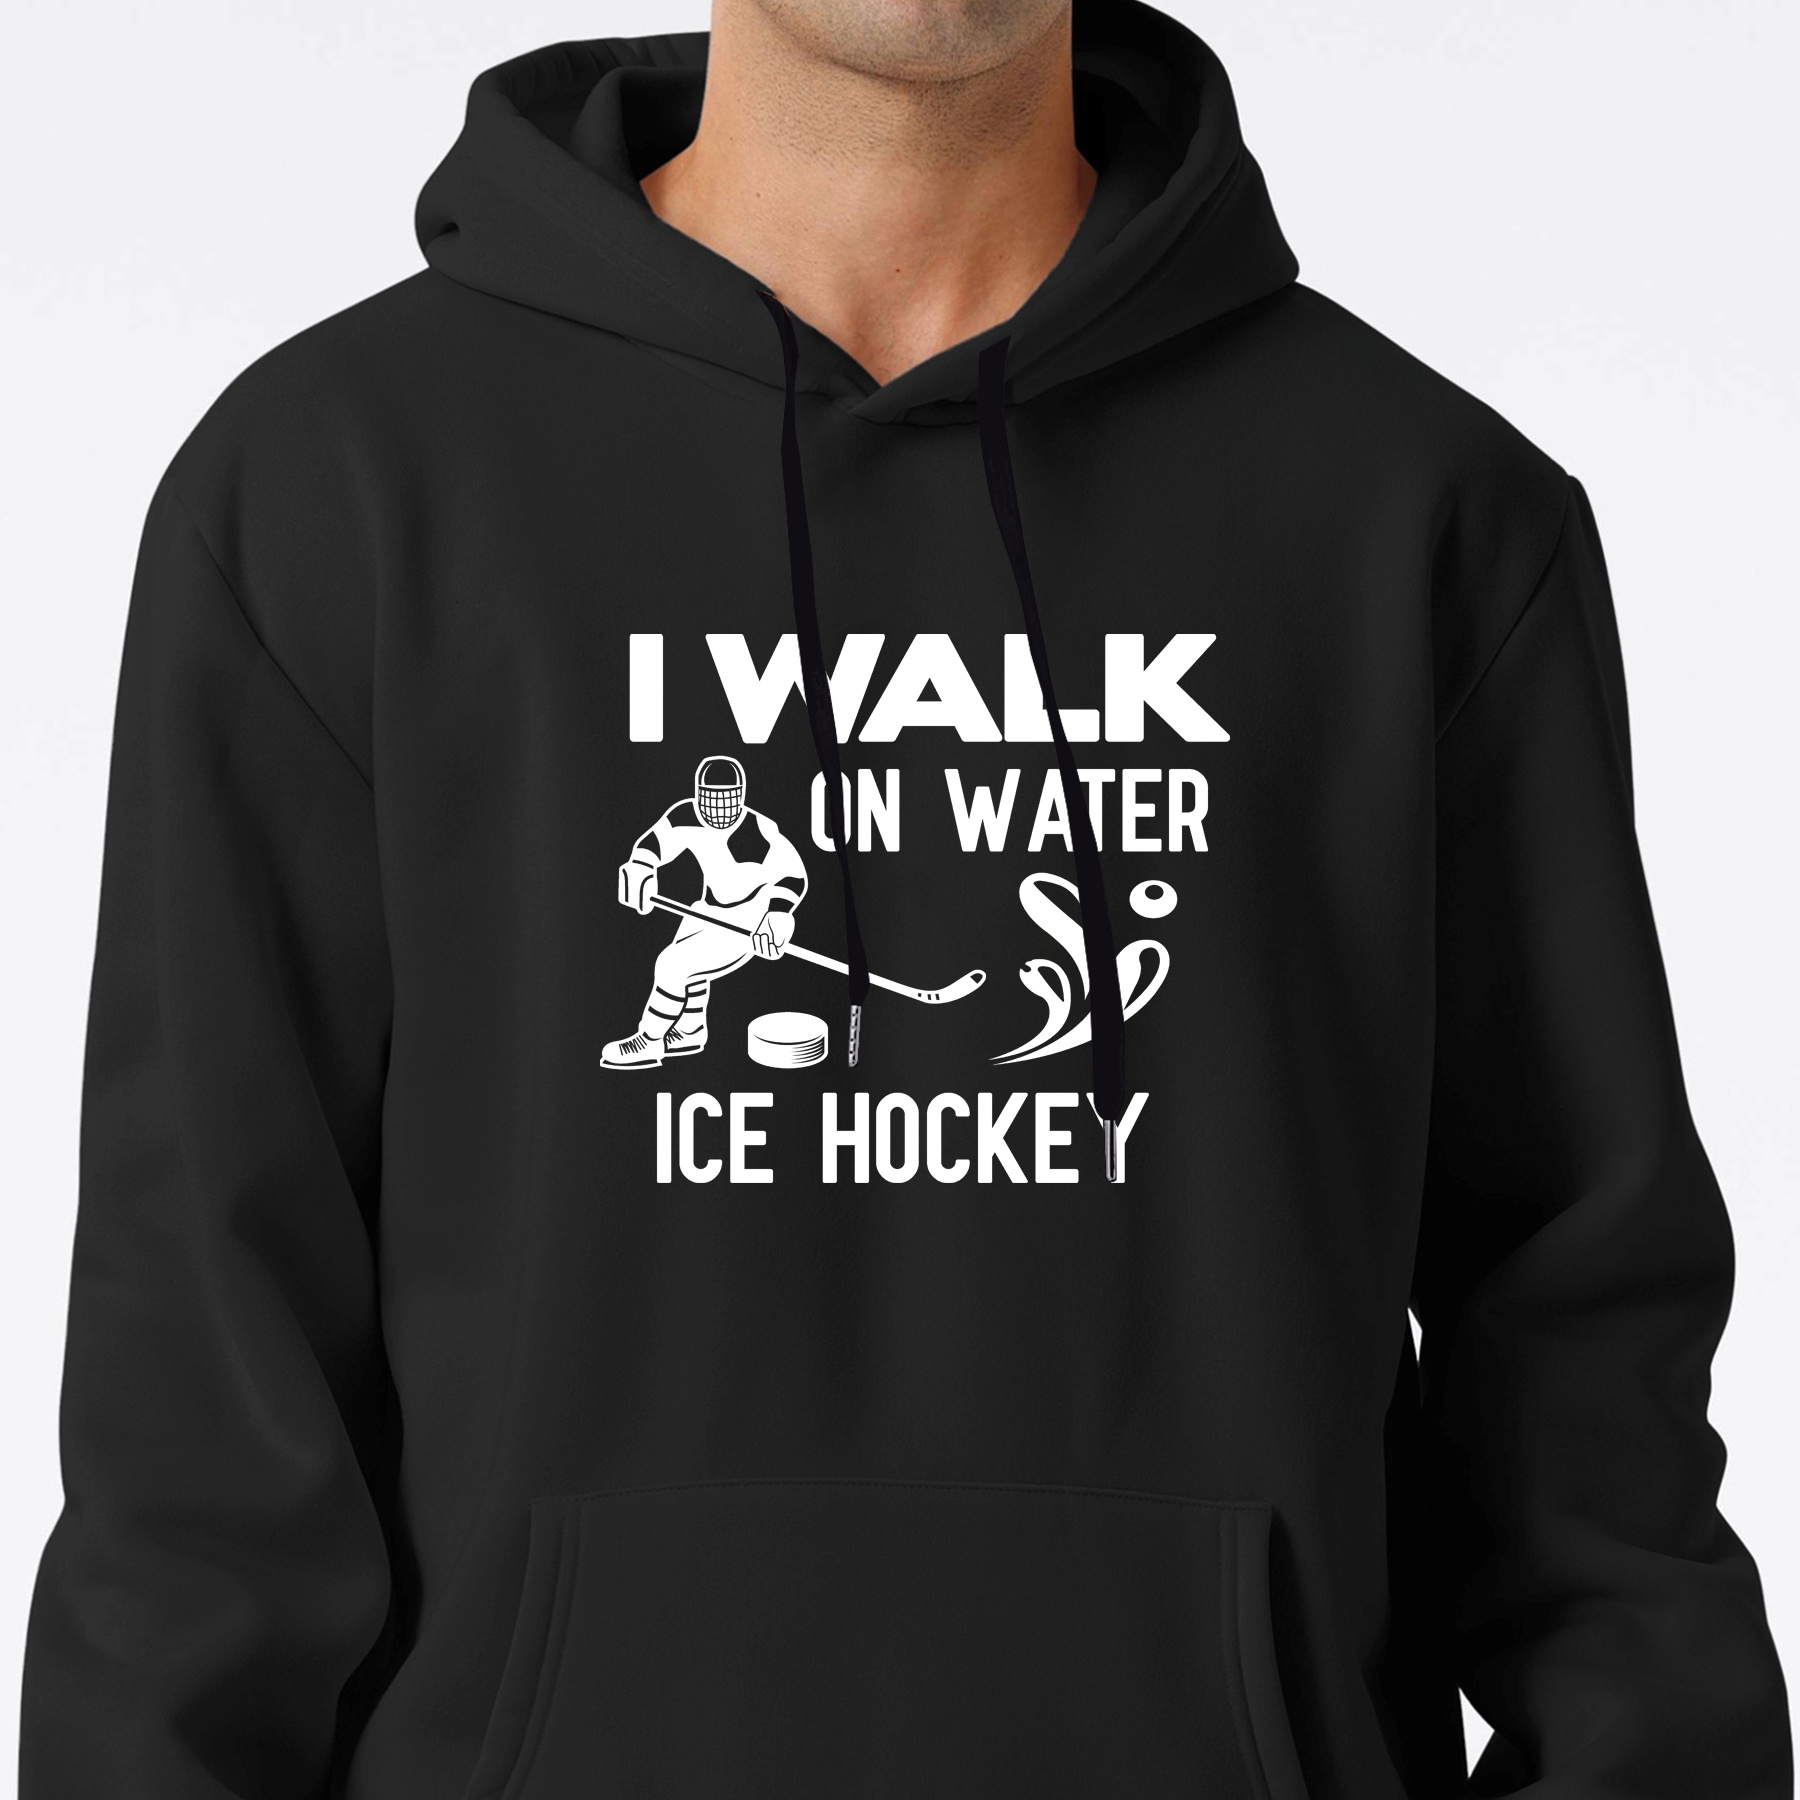 

I Walk In Water Ice Hockey Graphic Print Sweatshirt, Artistic Graphic Design Hoodies With Fleece For Men, Men's Warm Slightly Flex Hooded Streetwear Pullover, For Fall And Winter, As Gifts